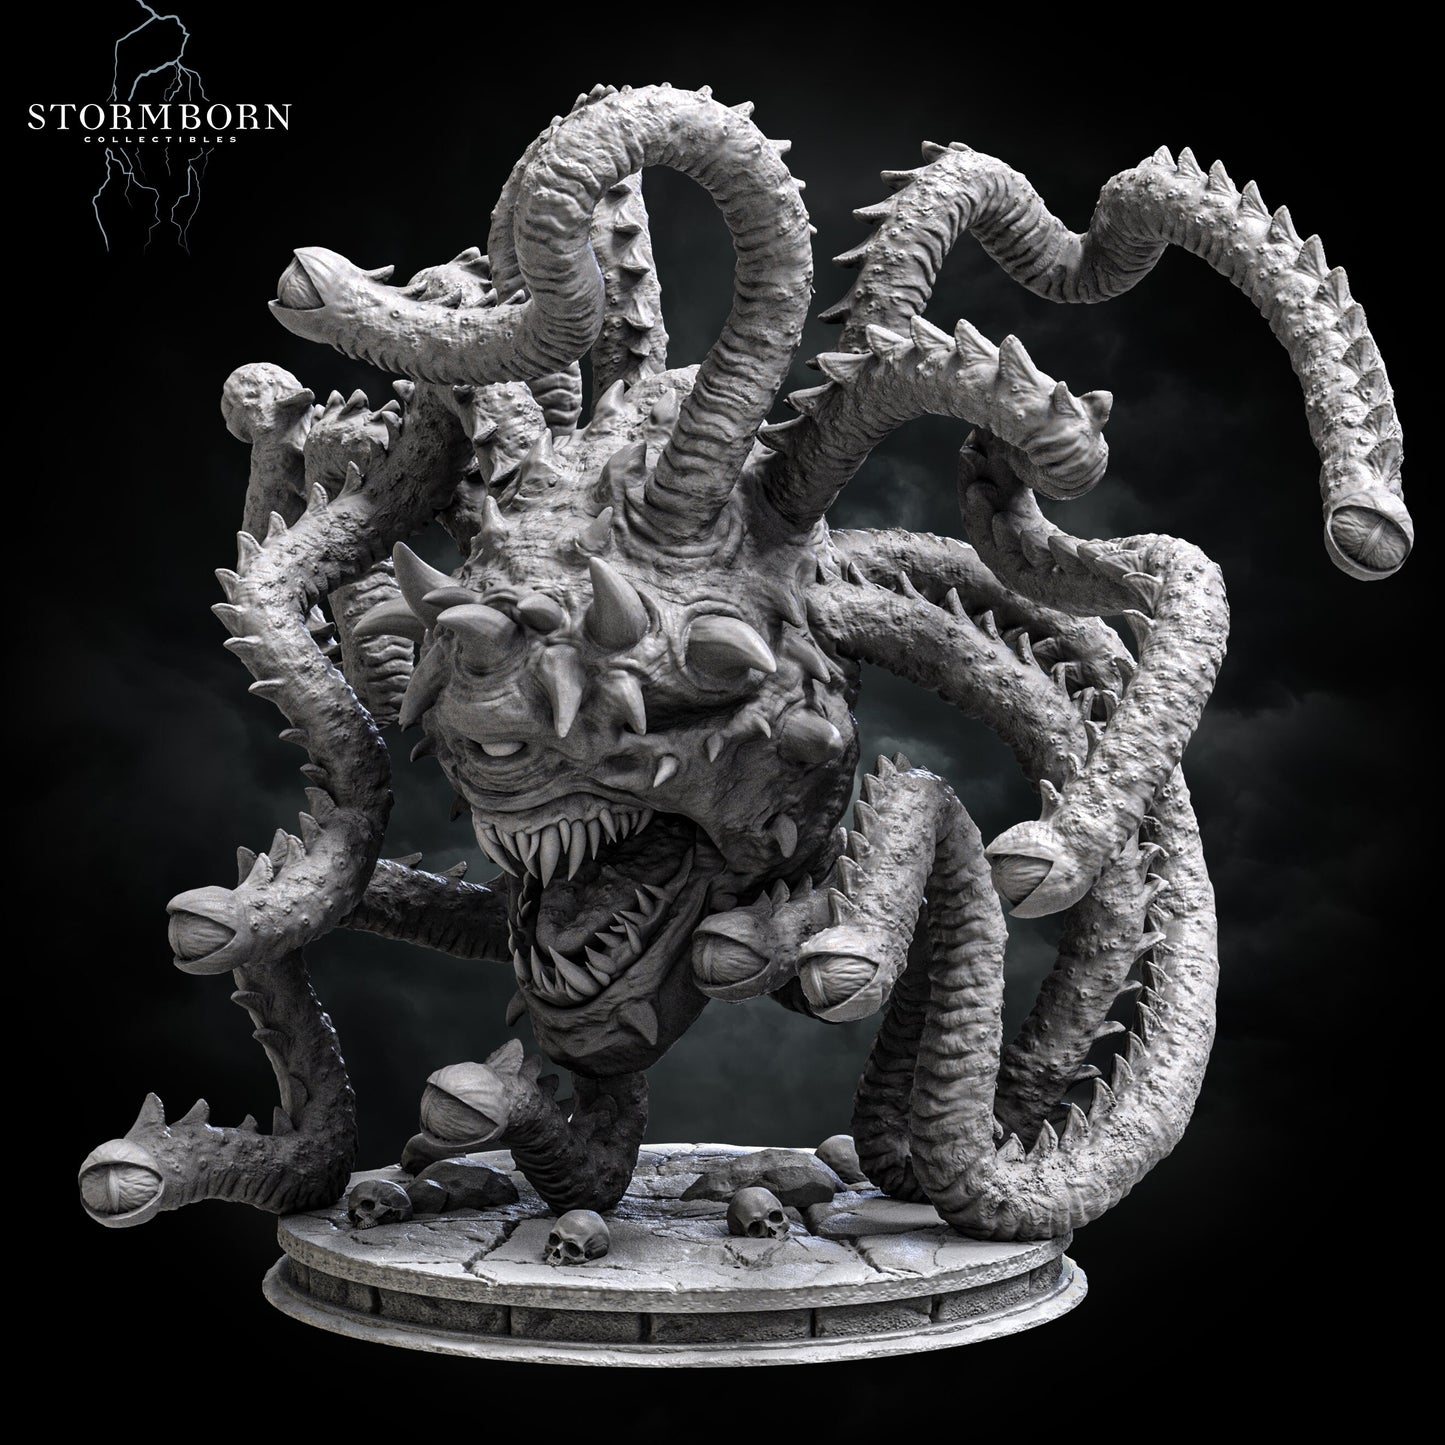 Ralakor, Lord of the Beholders | Large Monster | 32mm or 75mm scale | Resin 3D Printed Miniature | RPG | DND | Stormborn Collectibles